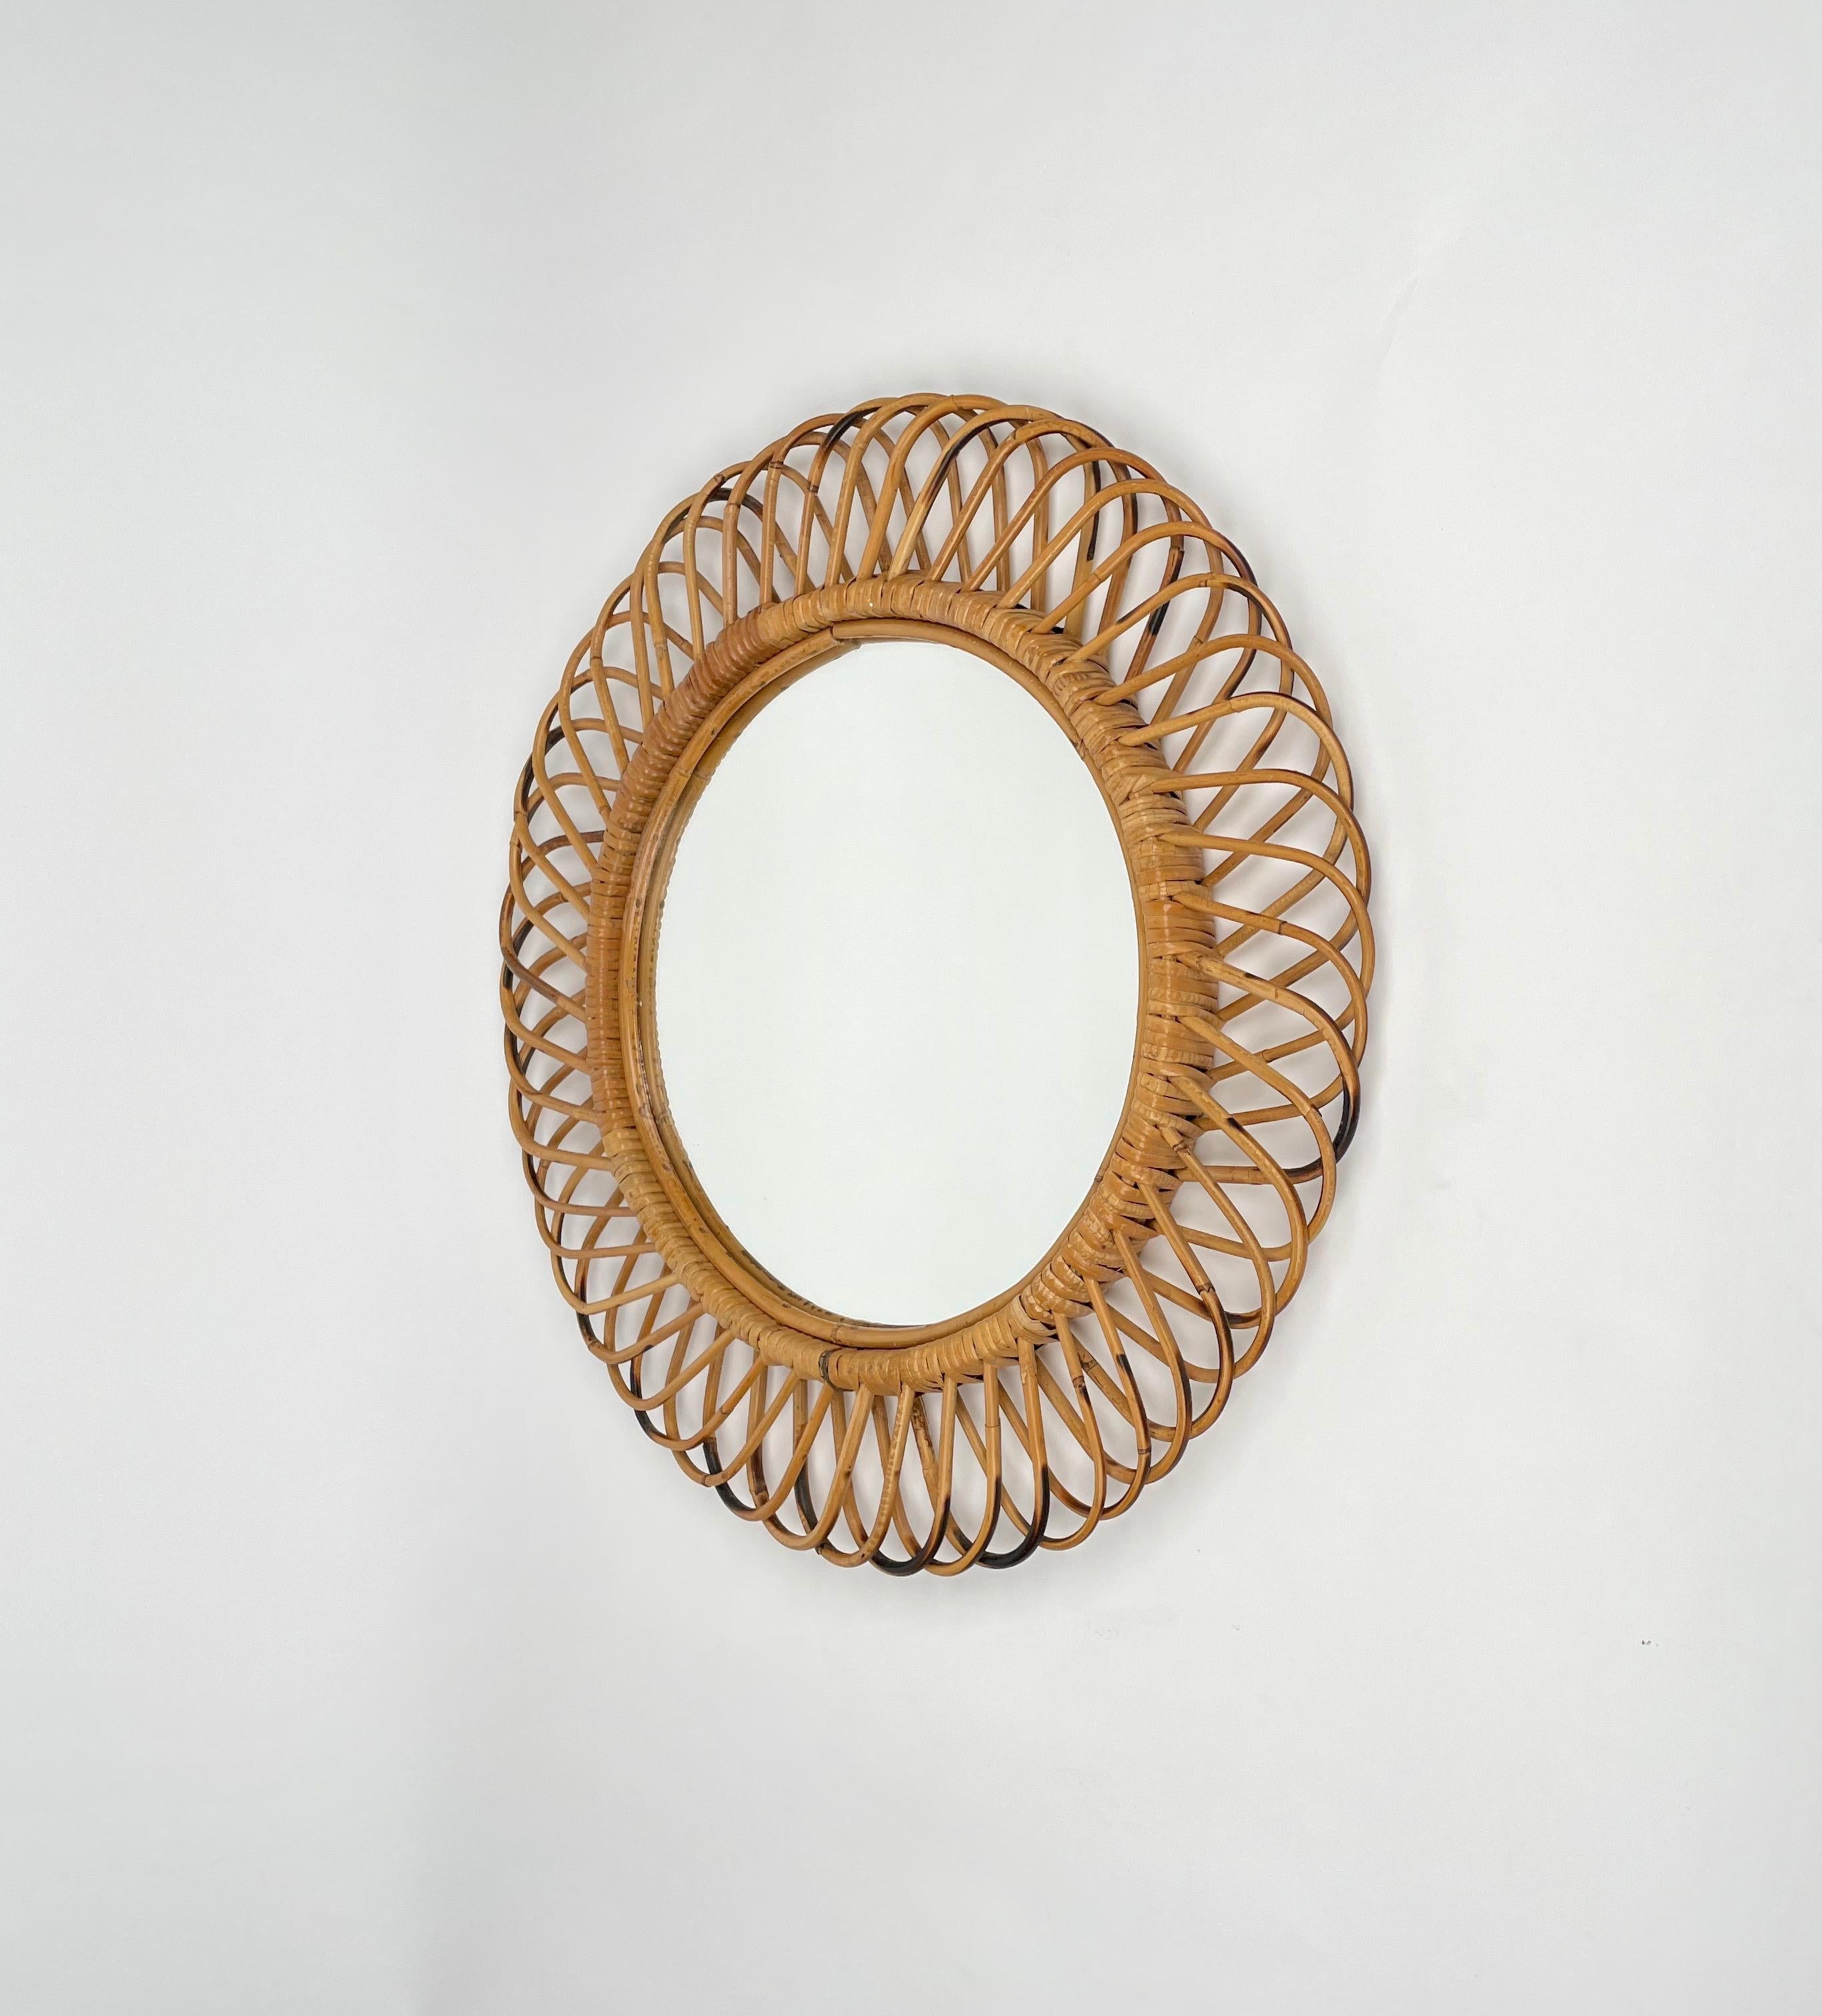 Midcentury Italian Riviera rattan and bamboo round mirror, 1960s.

This wall mirror is unique as it has a curved rattan beam and bamboo double frame, a solid internal one and an external one make of geometric patterns.